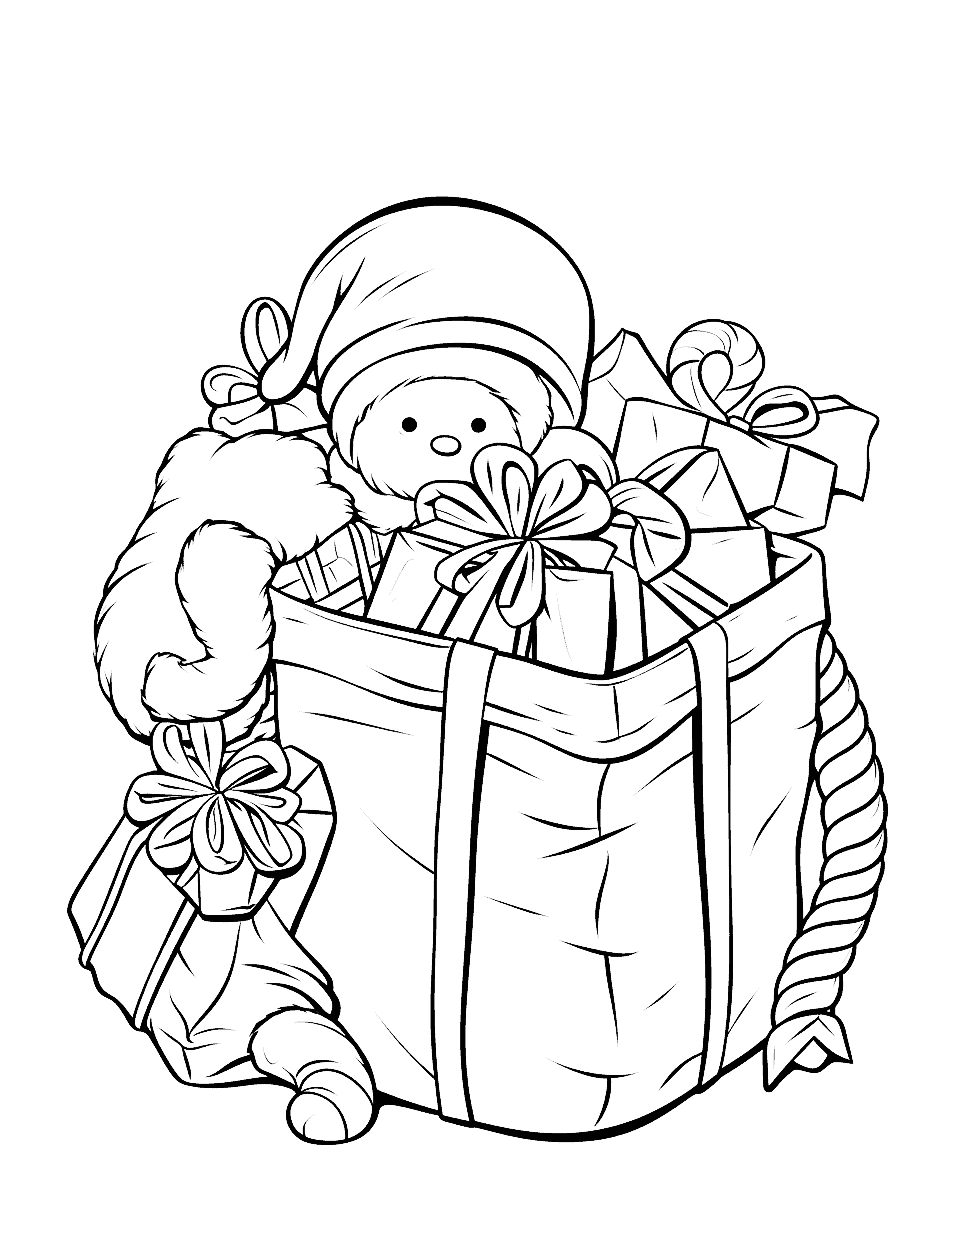 Santa's Sack Christmas Coloring Page - Santa’s sack overflowing with a variety of toys and presents.